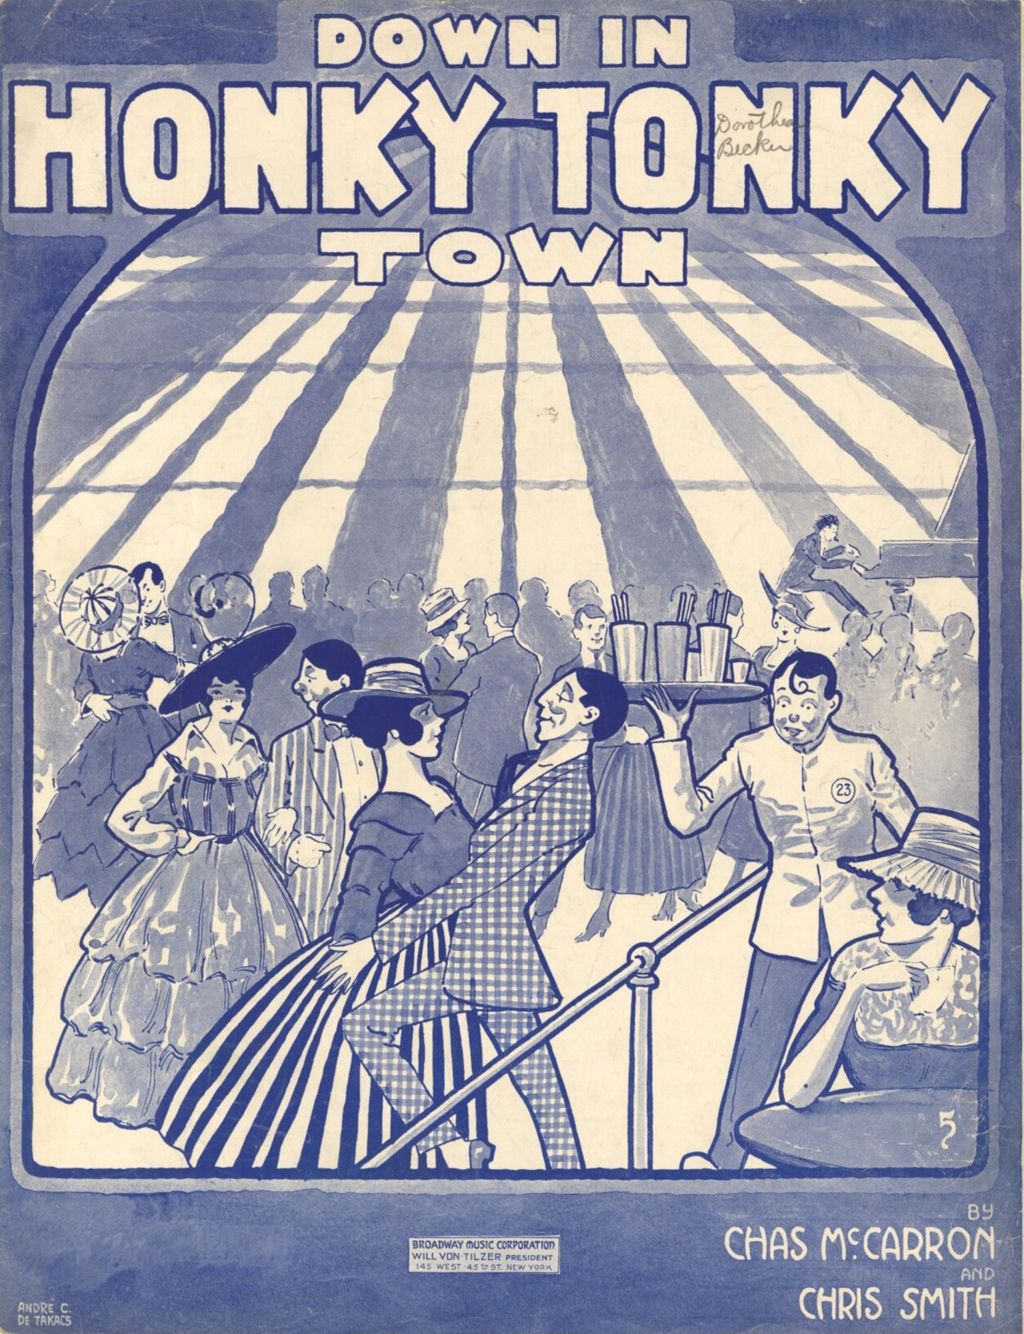 Down in Honky Tonky Town